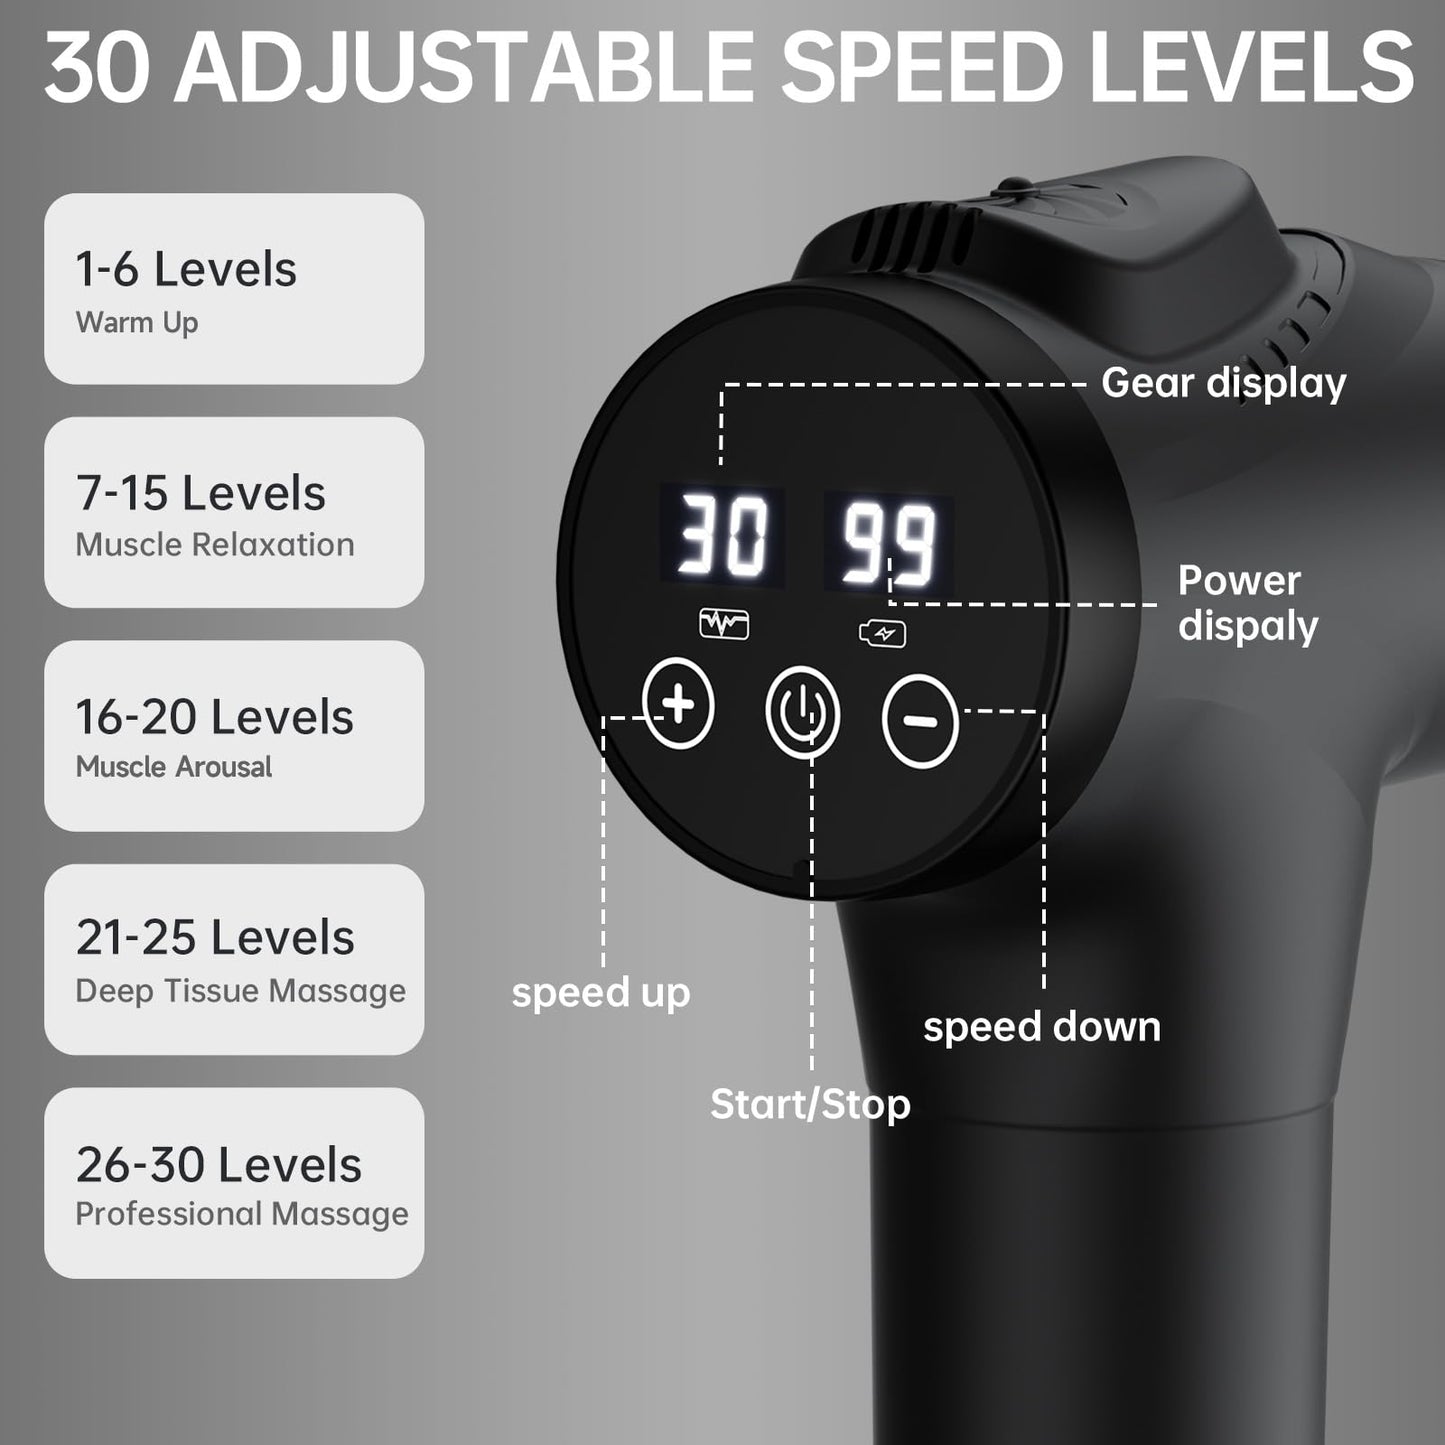 APHERMA Massage Gun, Muscle Massage Gun for Athletes Handheld Electric Deep Tissue Back Massager, Percussion Massage Device for Pain Relief with 30 Speed Levels 9 Heads detailsAPHERMA Massage Machine, Muscle Massage Machine for Athletes Handheld Electric Deep Tissue Back Massager, Percussion Massage Device for Pain Relief with 30 Speed Levels 9 Heads details